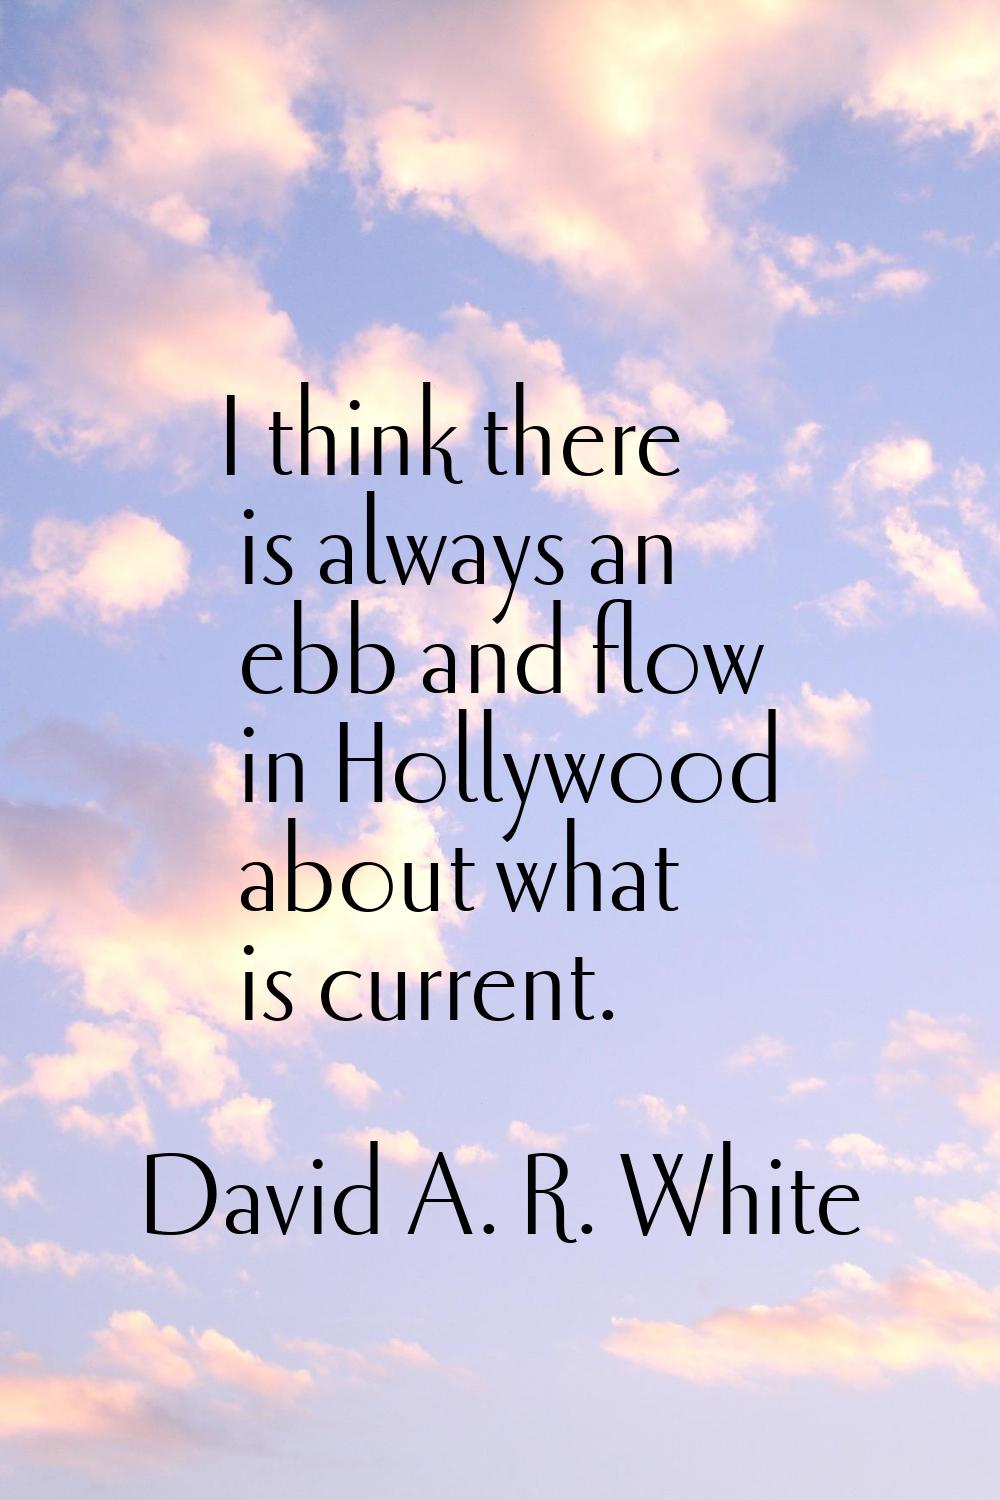 I think there is always an ebb and flow in Hollywood about what is current.